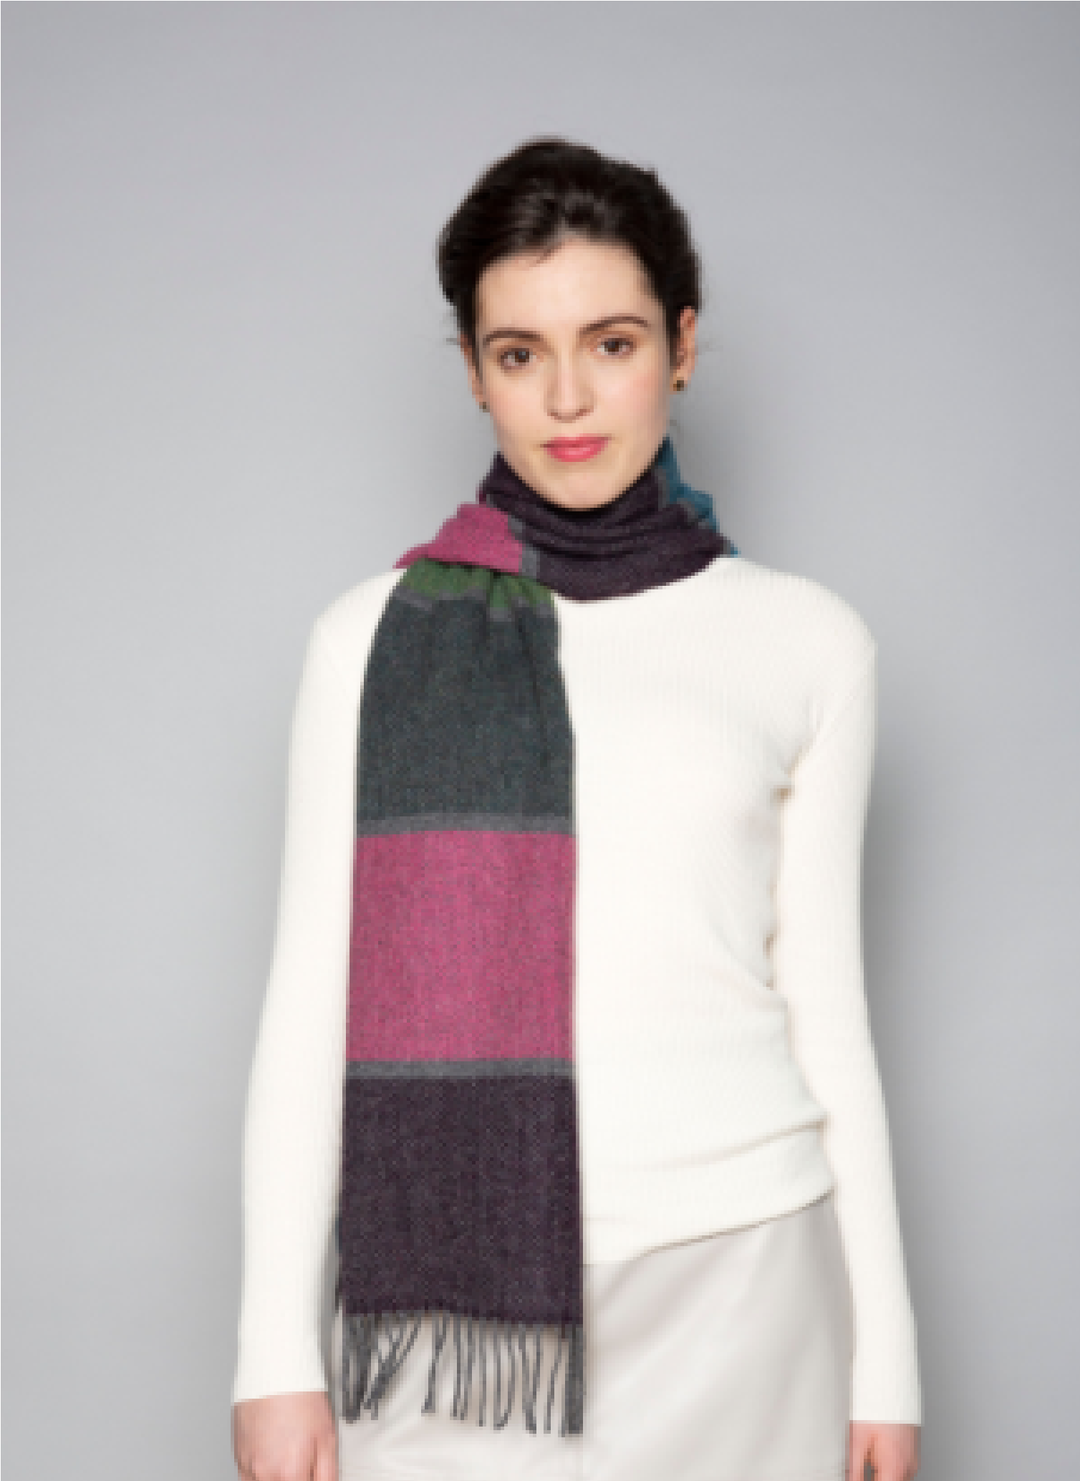 Lambs Wool Scarf from Ireland in Contemporary Stripe